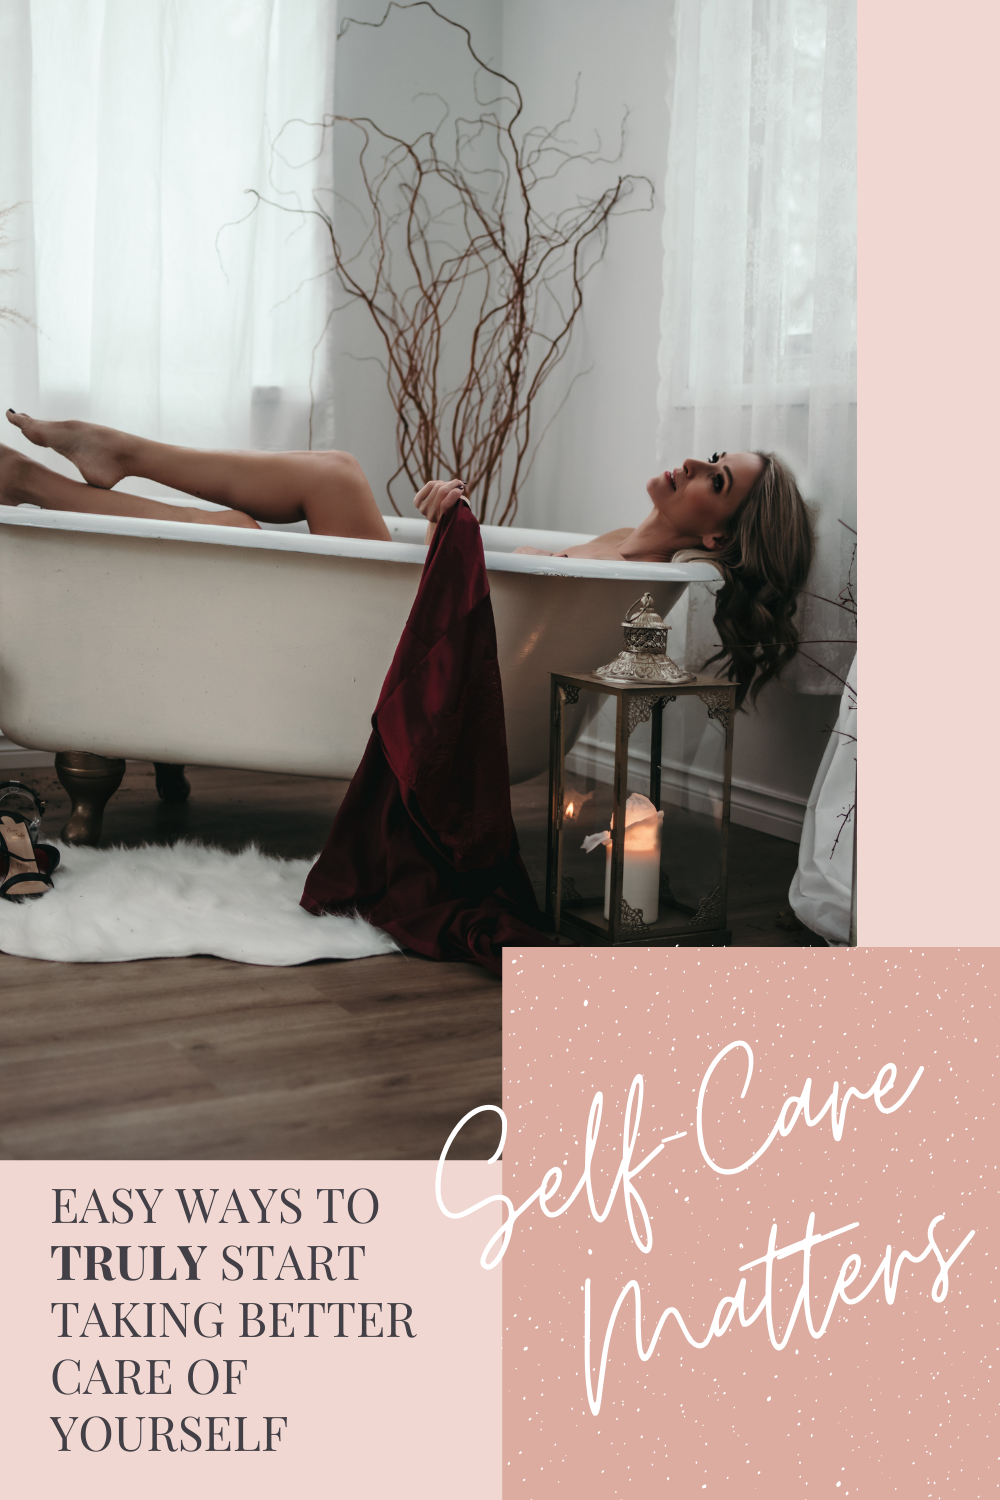 Get started in self-care with these easy tips. And yes we mean REAL self-care, not just a bubble bath. Are you ready? | #self-care #selfcare